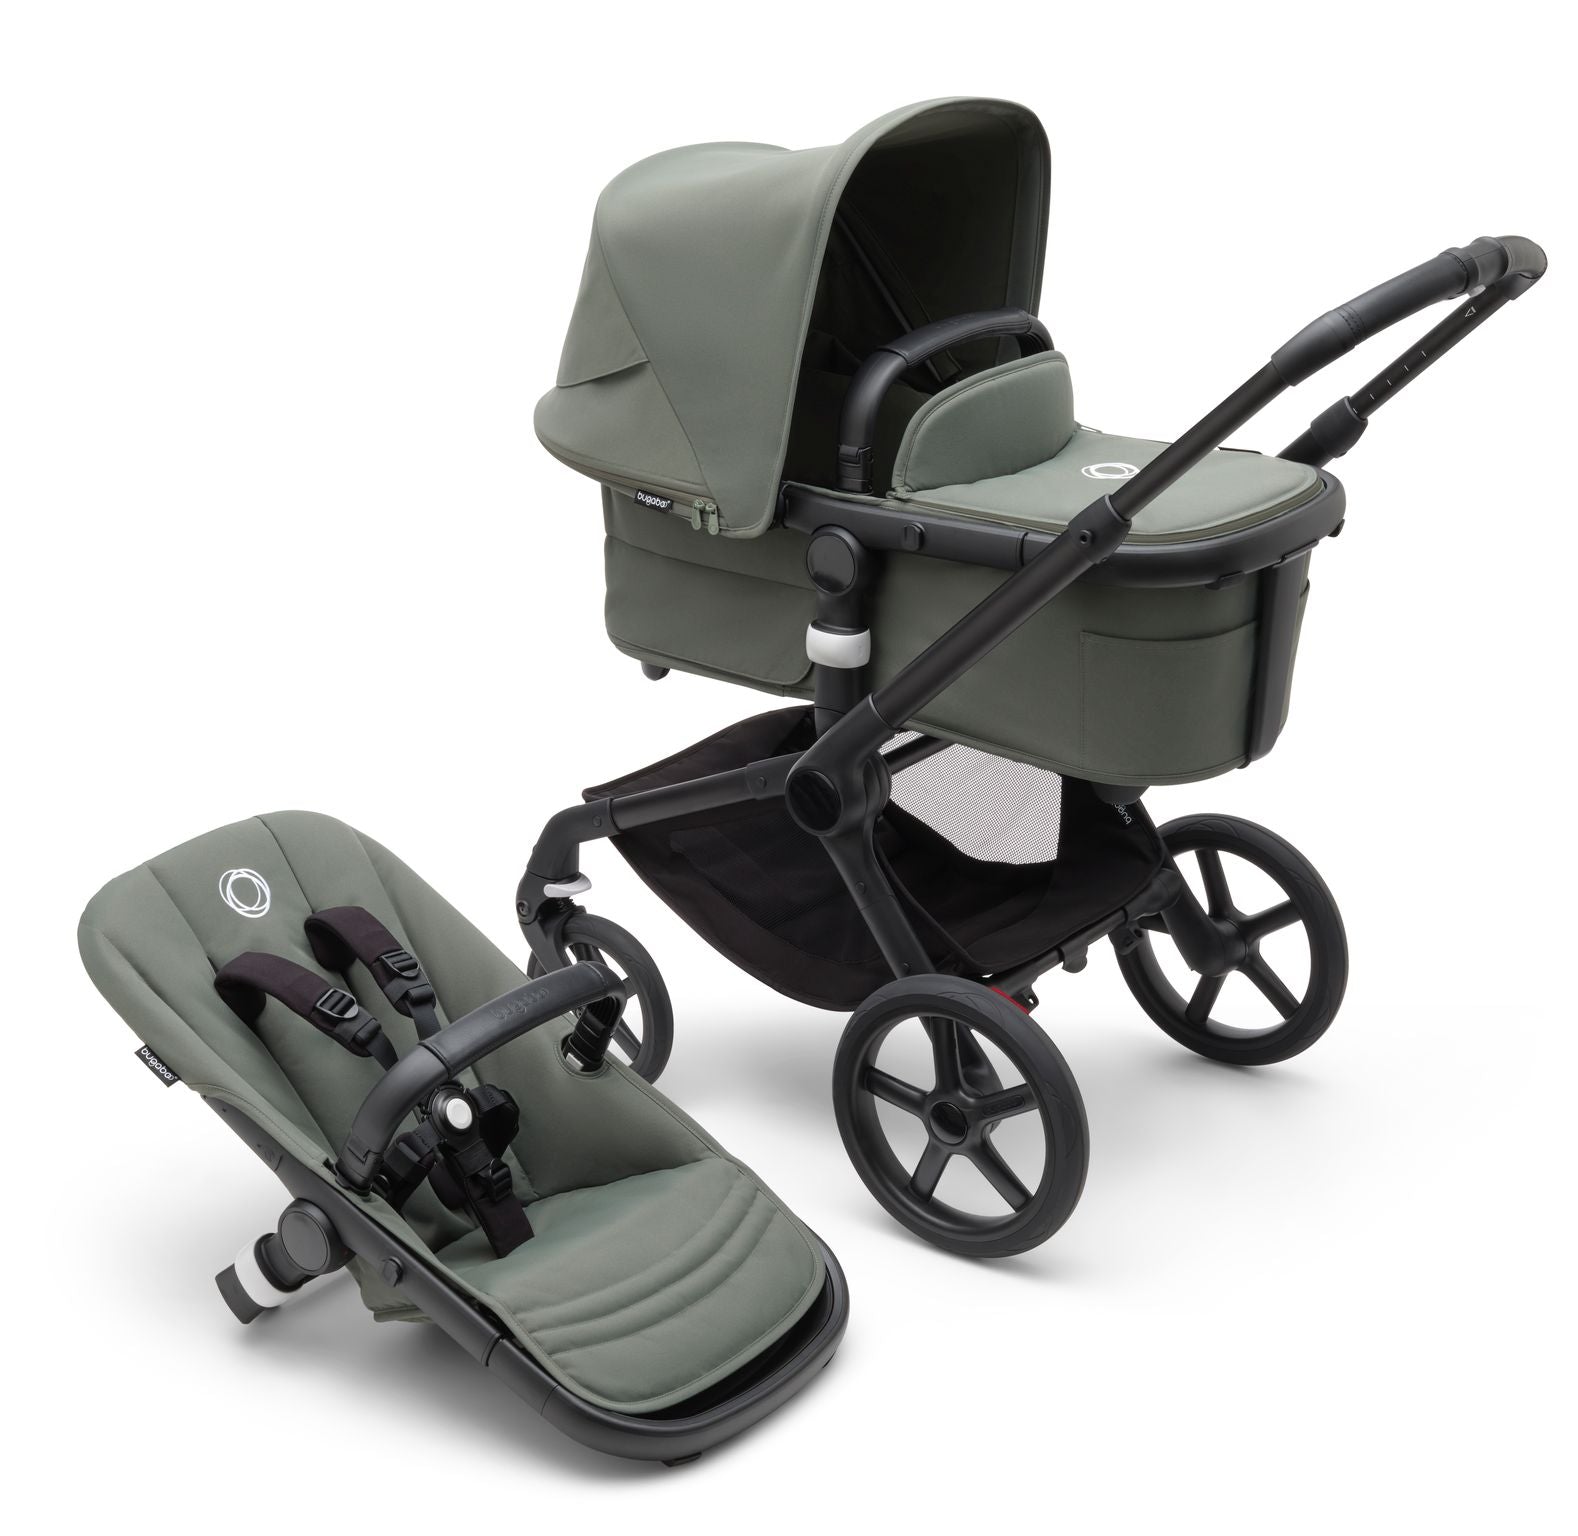 Bugaboo Fox 5 complete BLACK/FOREST GREEN-FOREST GREEN